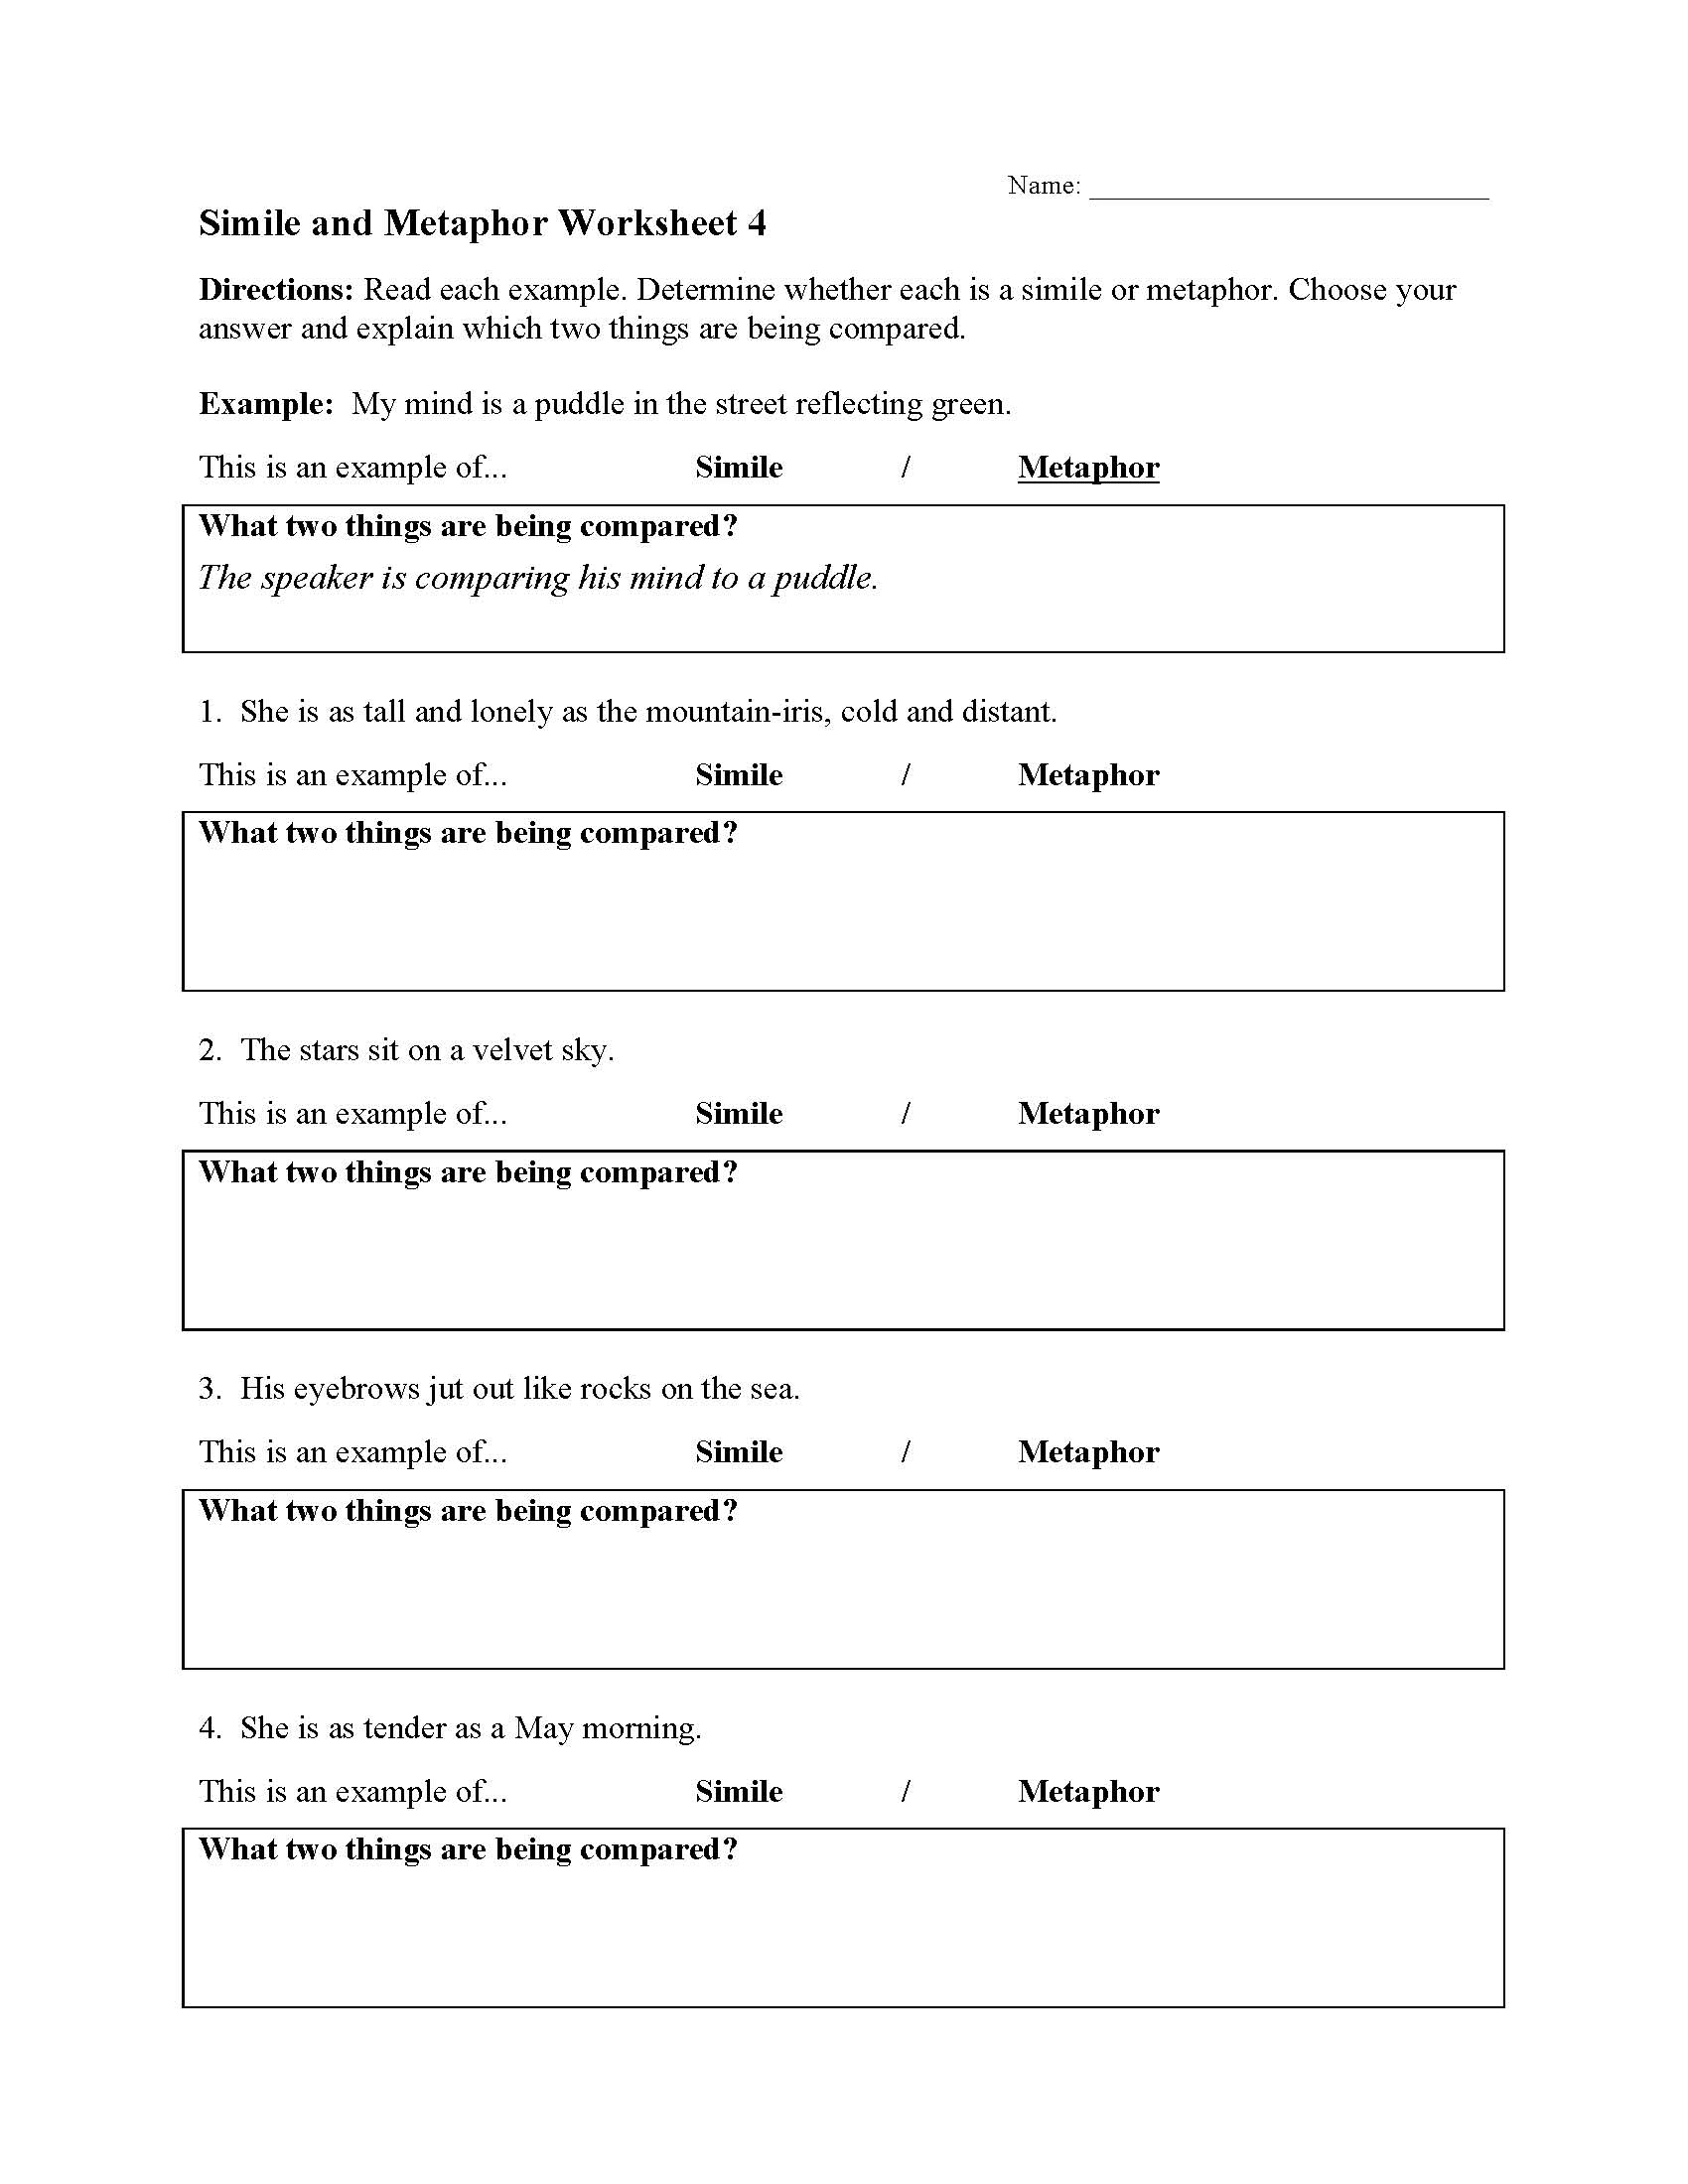 Simile And Metaphor Worksheet Answers